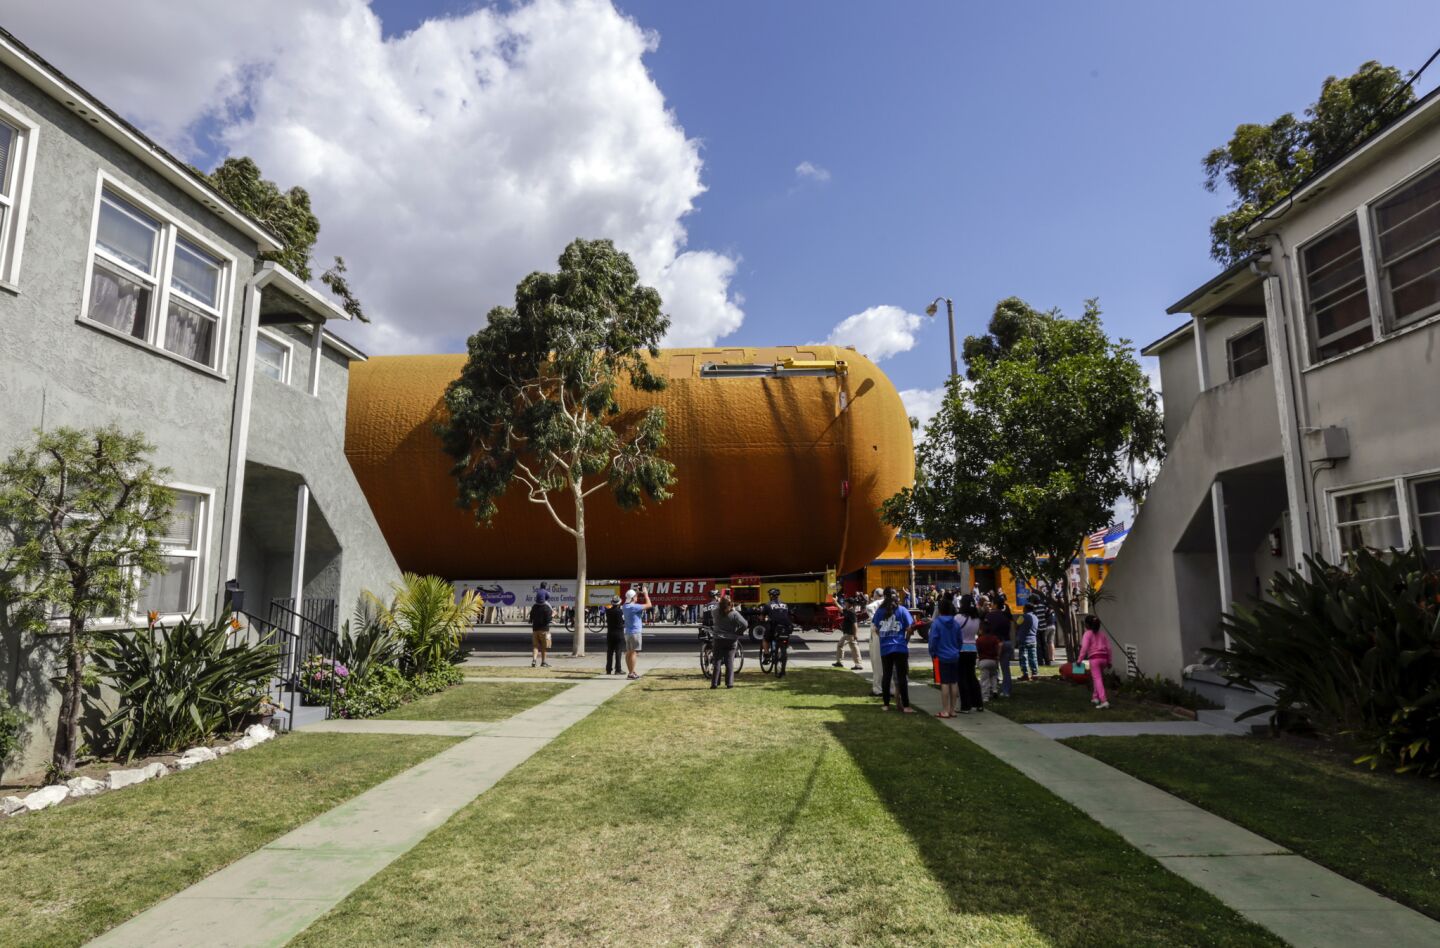 ET-94, NASA's last remaining space shuttle external tank, travels on Arbor Vitae Street in Inglewood on its way to the California Science Center on Saturday.